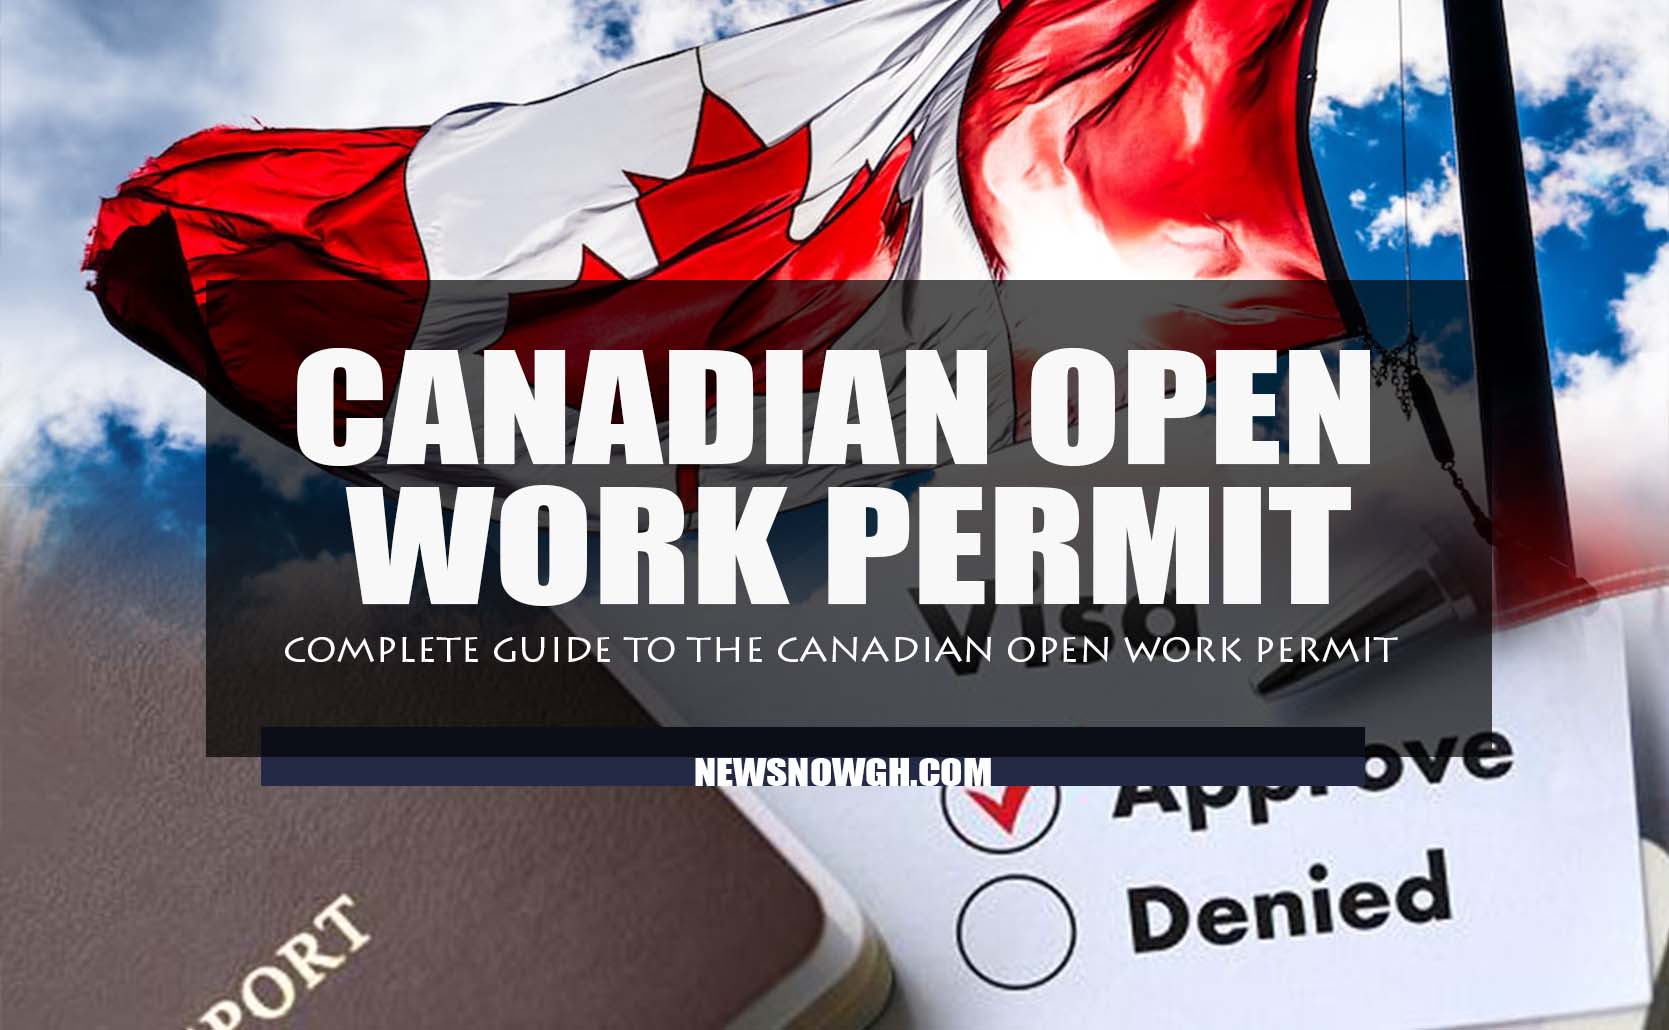 Canadian Open Work Permit Complete Guide